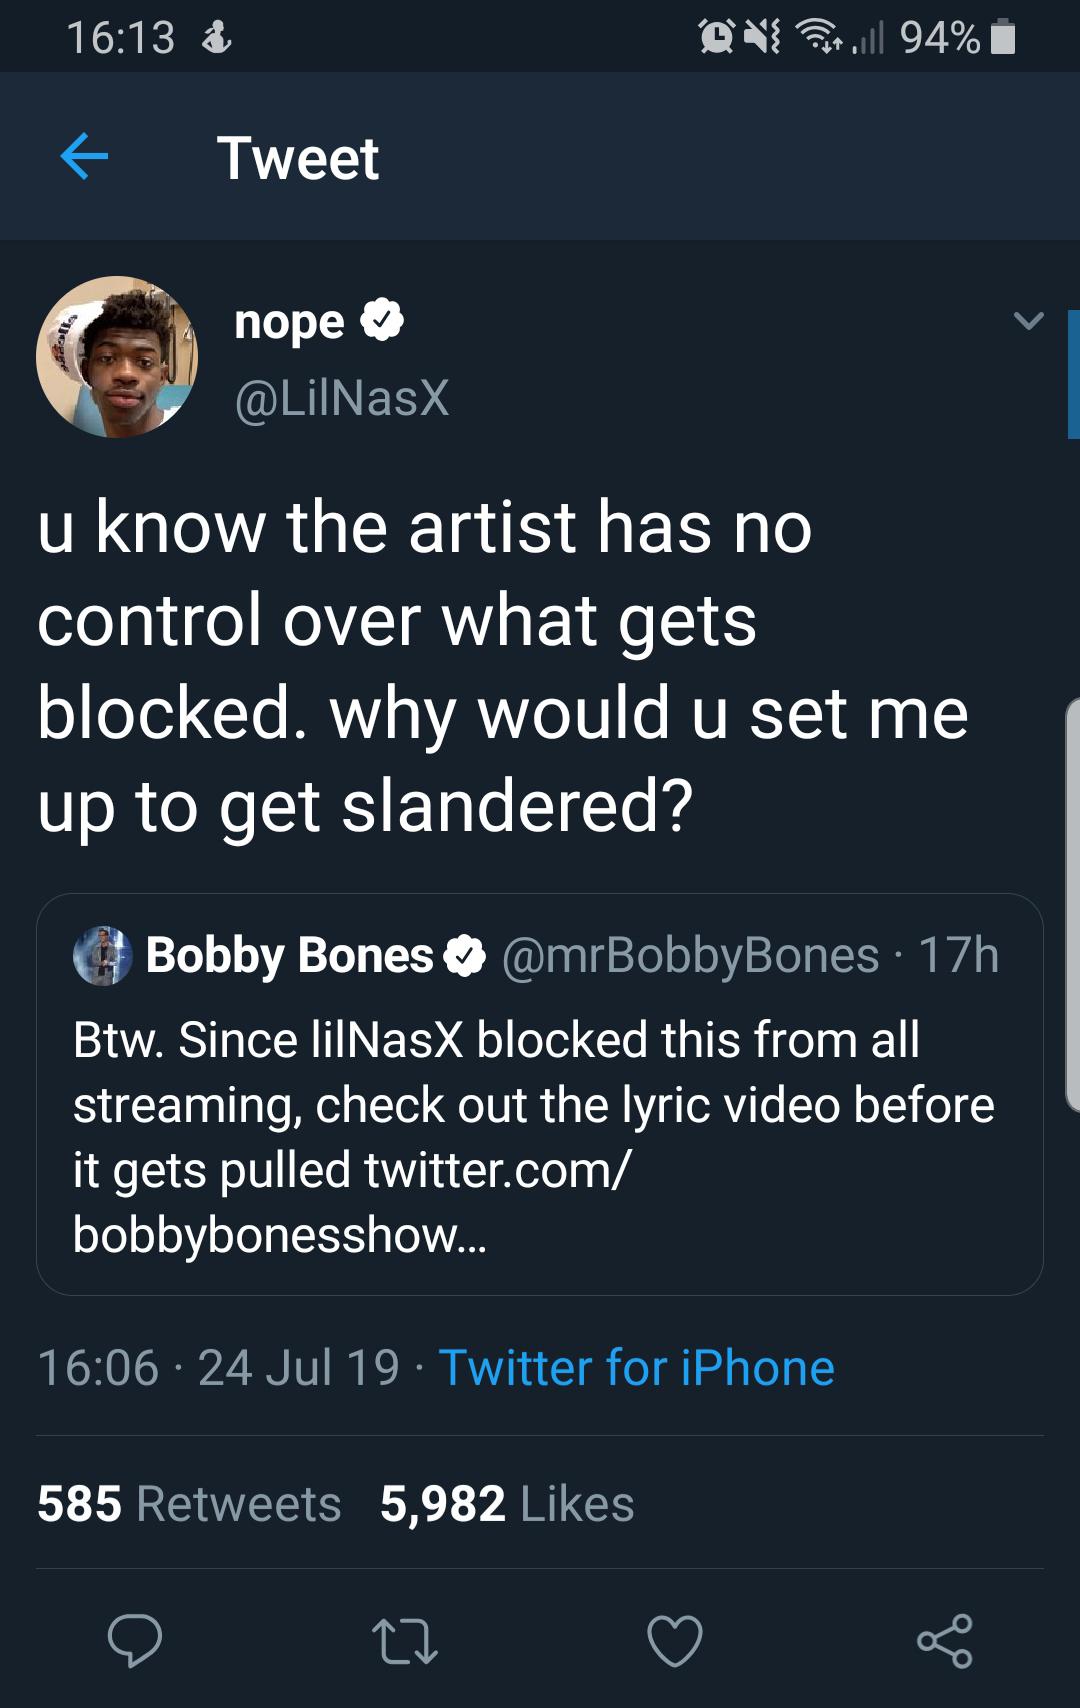 lyrics - & en Patill 94% || Tweet nope u know the artist has no control over what gets blocked. why would u set me up to get slandered? Bobby Bones ~ 17h Btw. Since lilNasX blocked this from all streaming, check out the lyric video before it gets pulled t